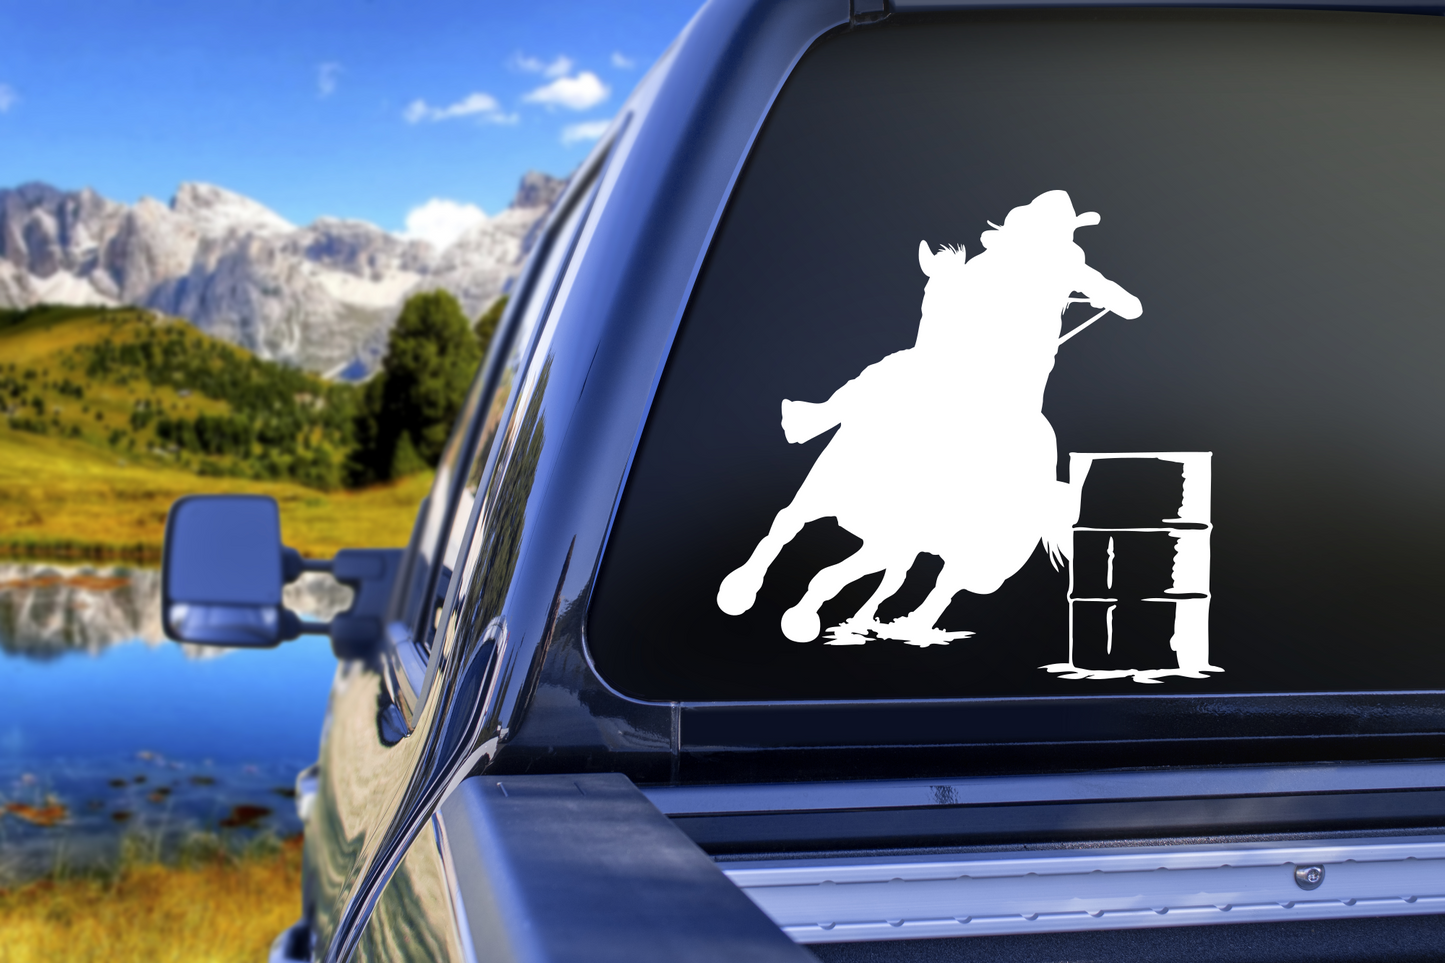 Barrel Racing Vinyl Decal Sticker, Rodeo Decal, Cowgirl Decal